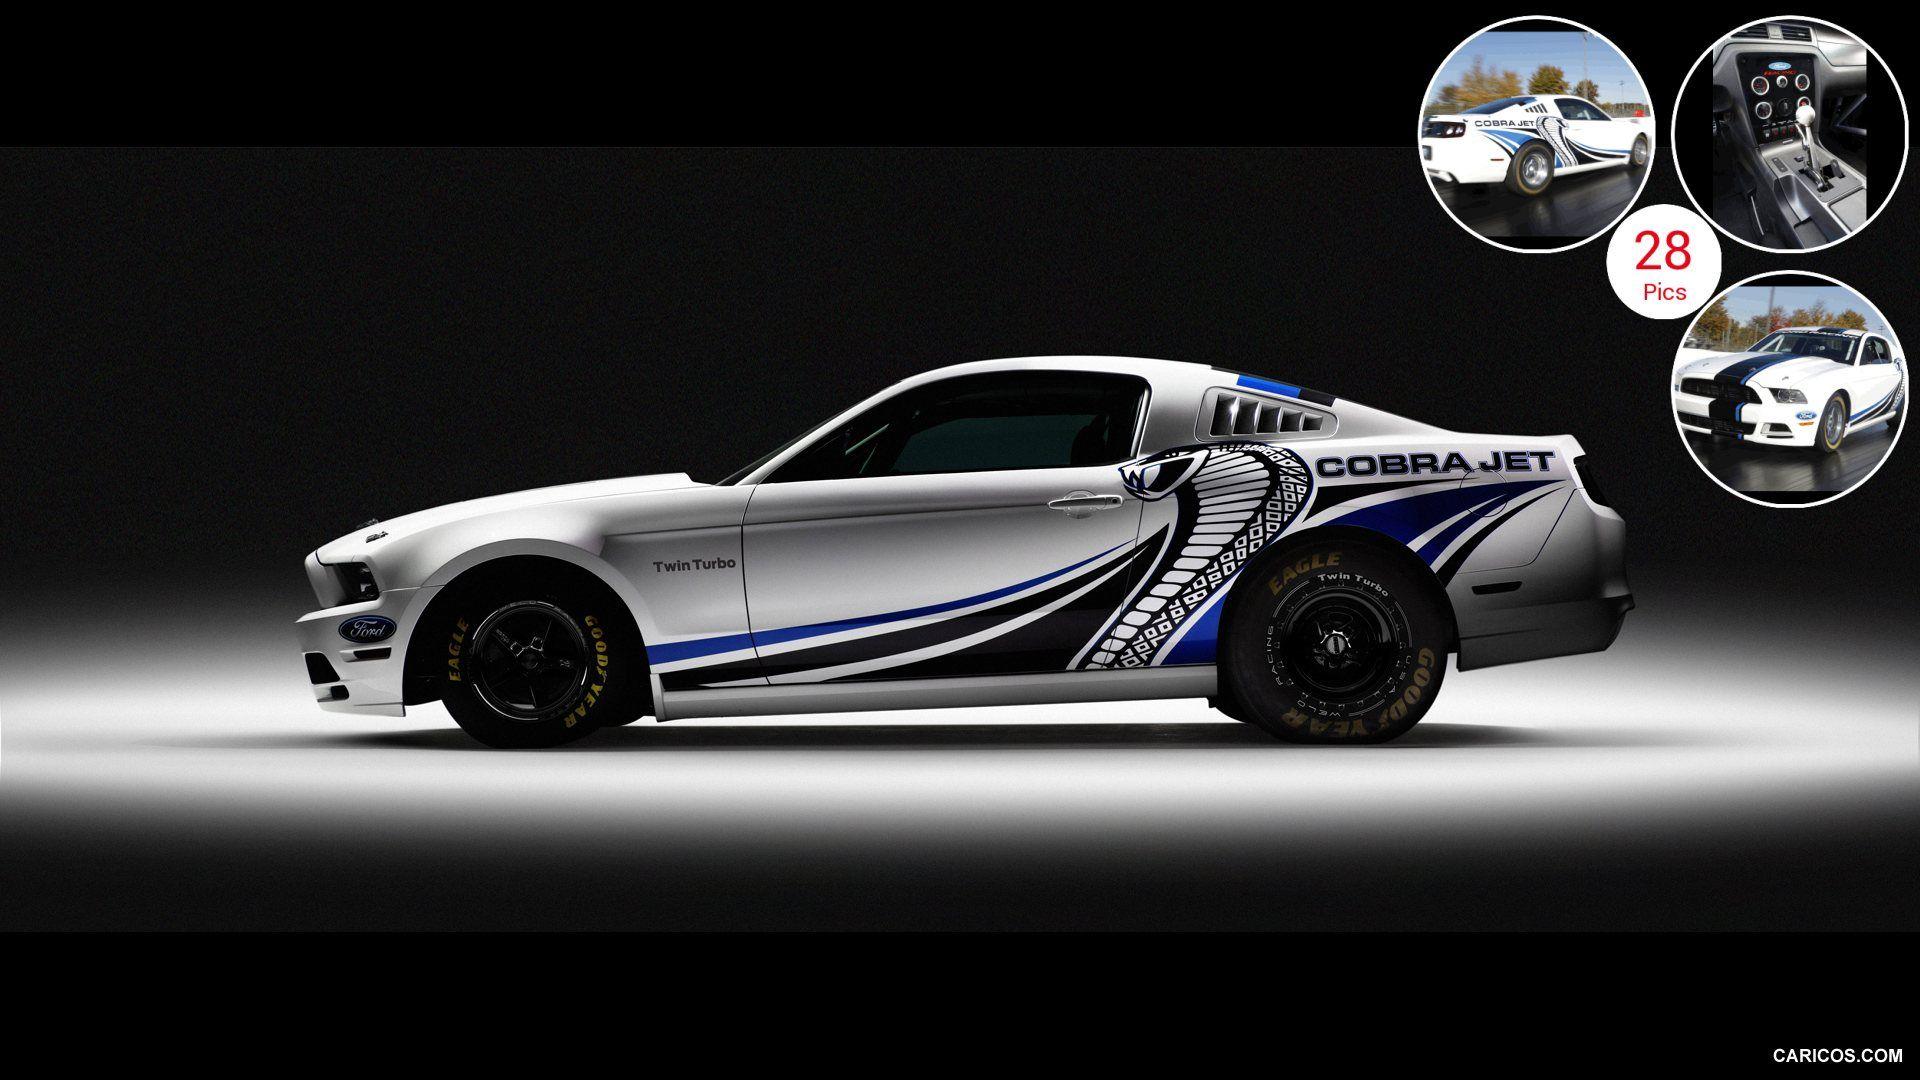 Ford Mustang Cobra Jet Twin Turbo Concept. HD Wallpaper